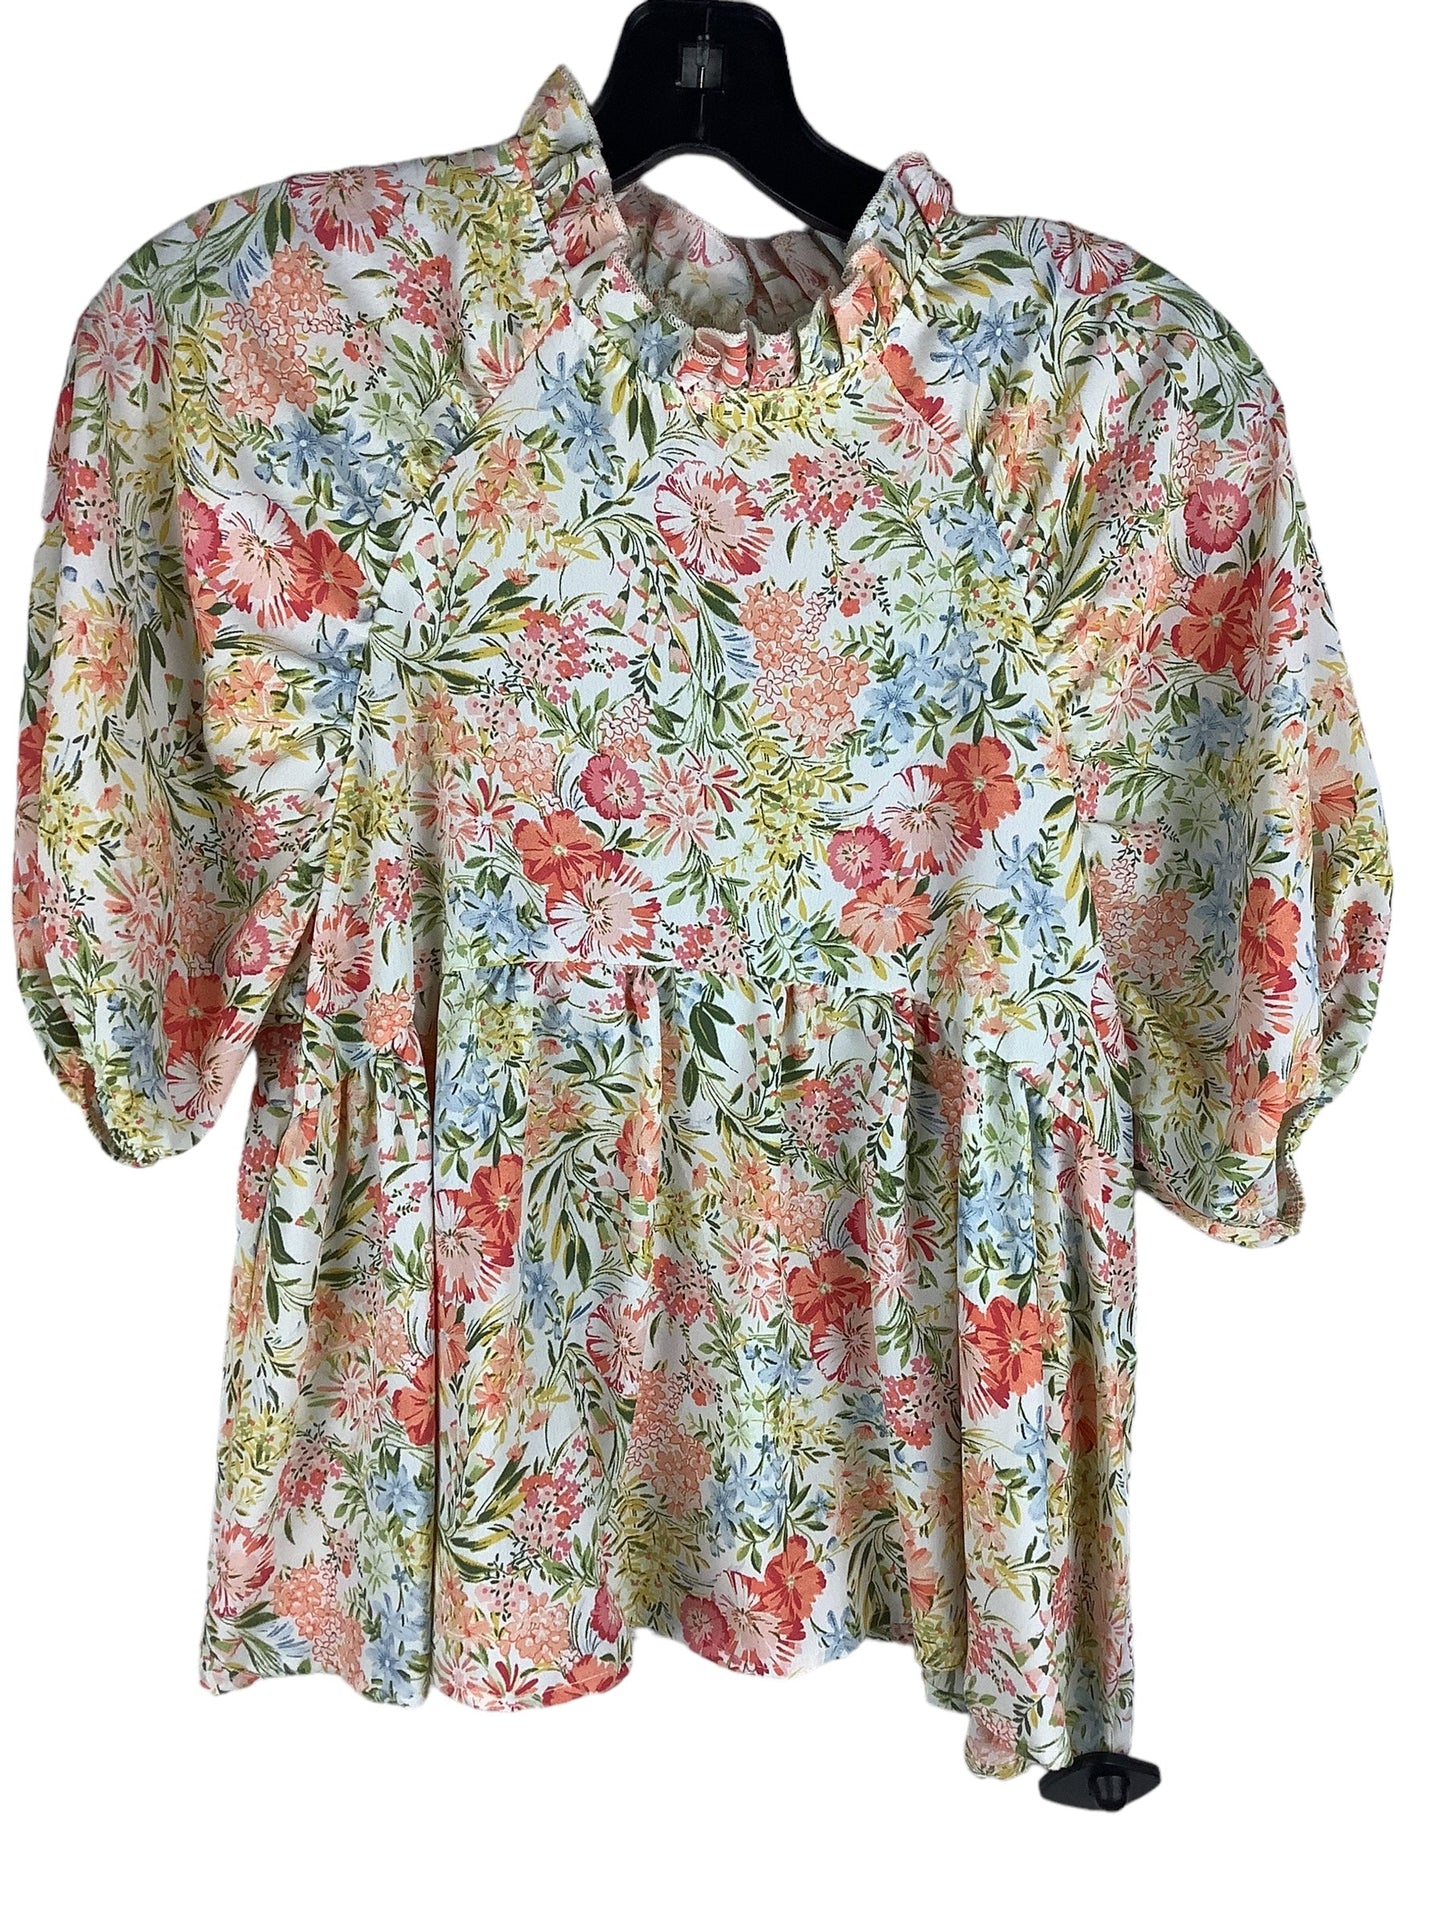 Multi-colored Top Short Sleeve Entro, Size M